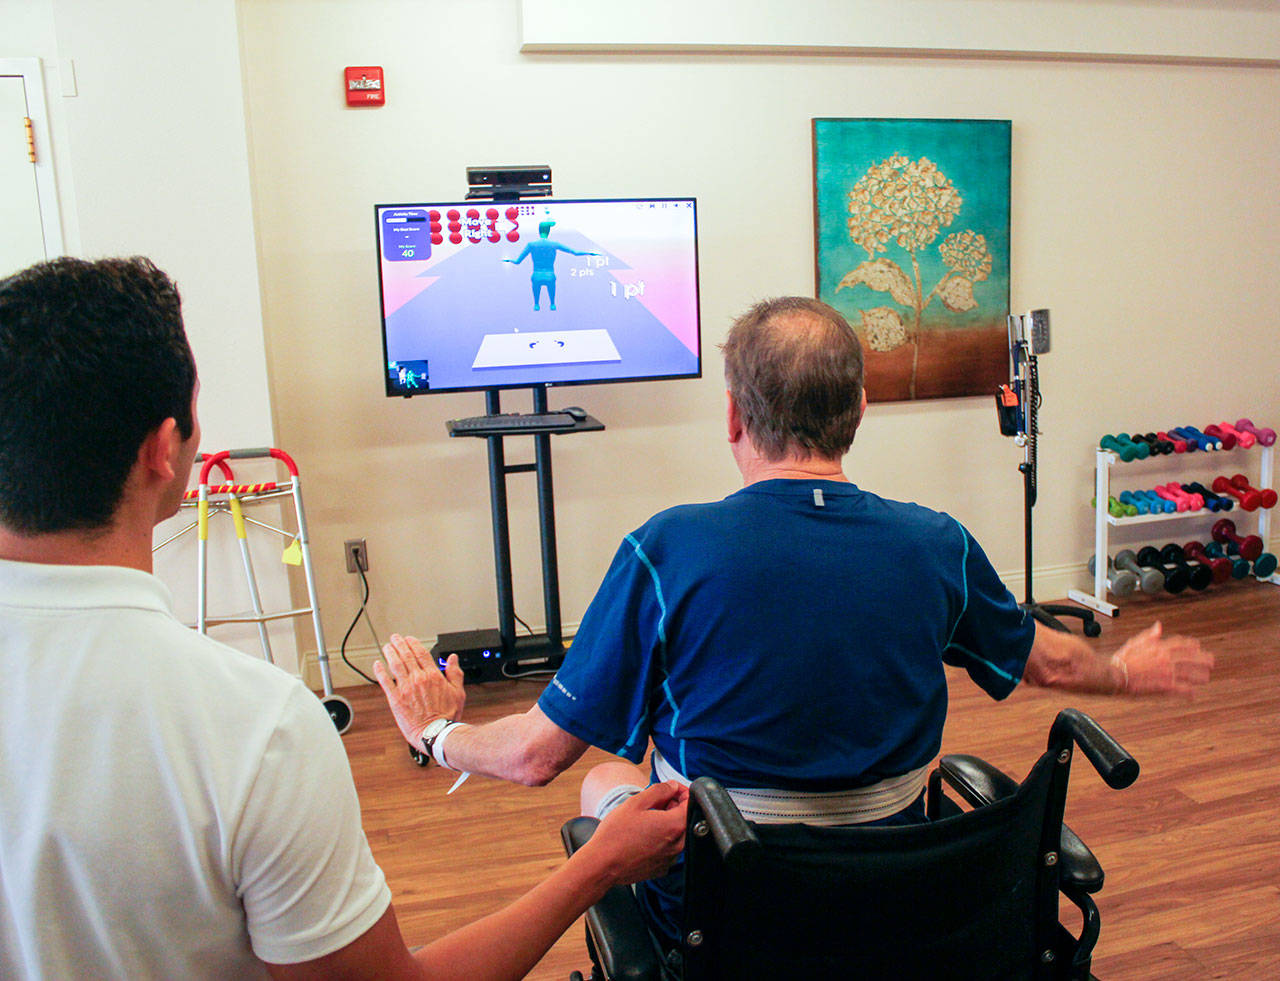 John Oleson practices his mobility and strength building through a therapeutic game on Jintronix, Aug. 2. (Sophie Bonomi/Kitsap News Group)